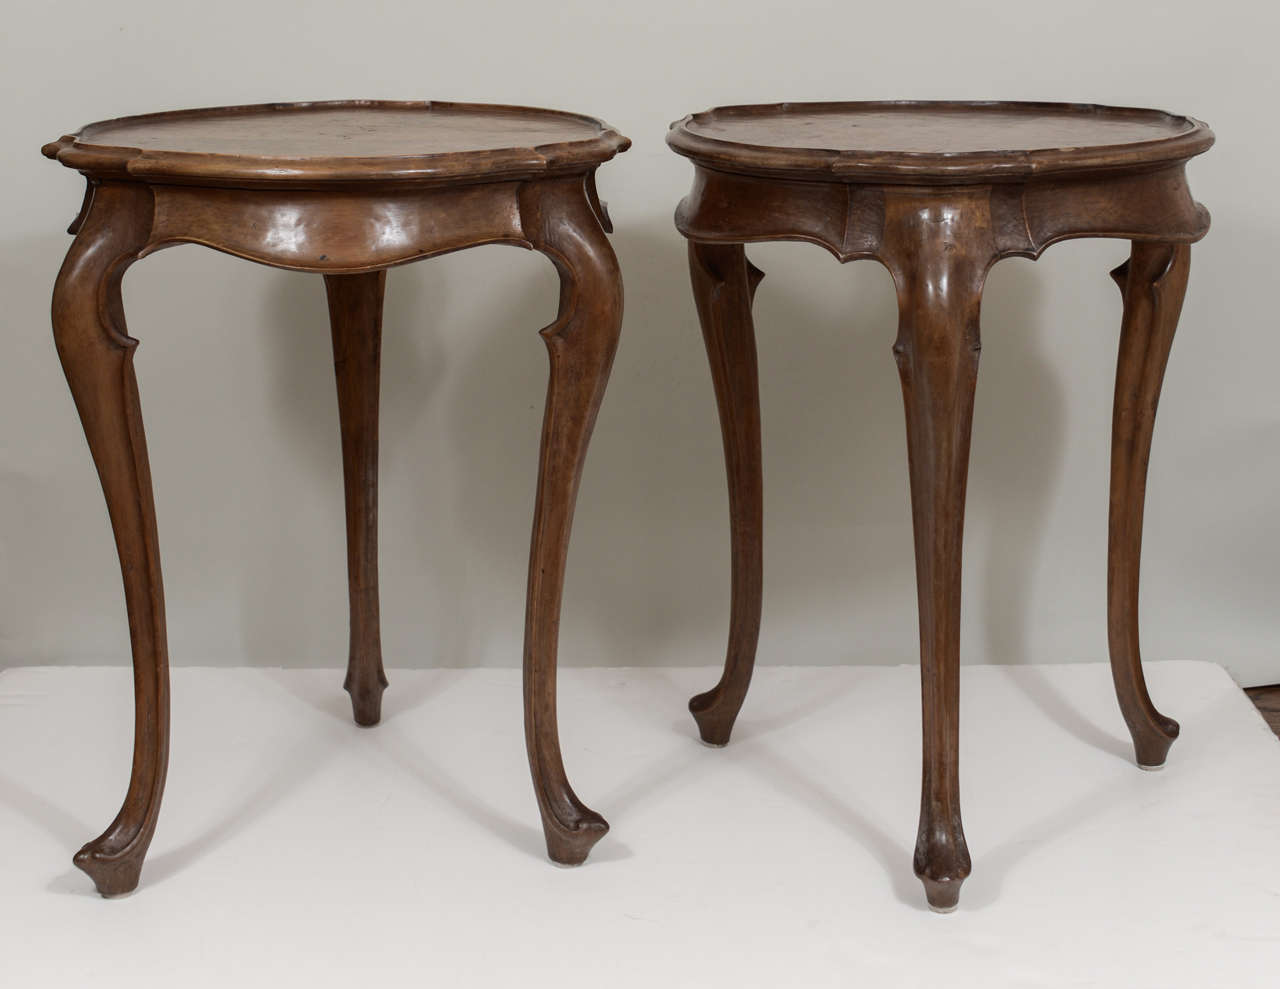 A pair of 19th century Spanish carved walnut tables with cabriole legs and curved, flared skirts. In wonderful condition.